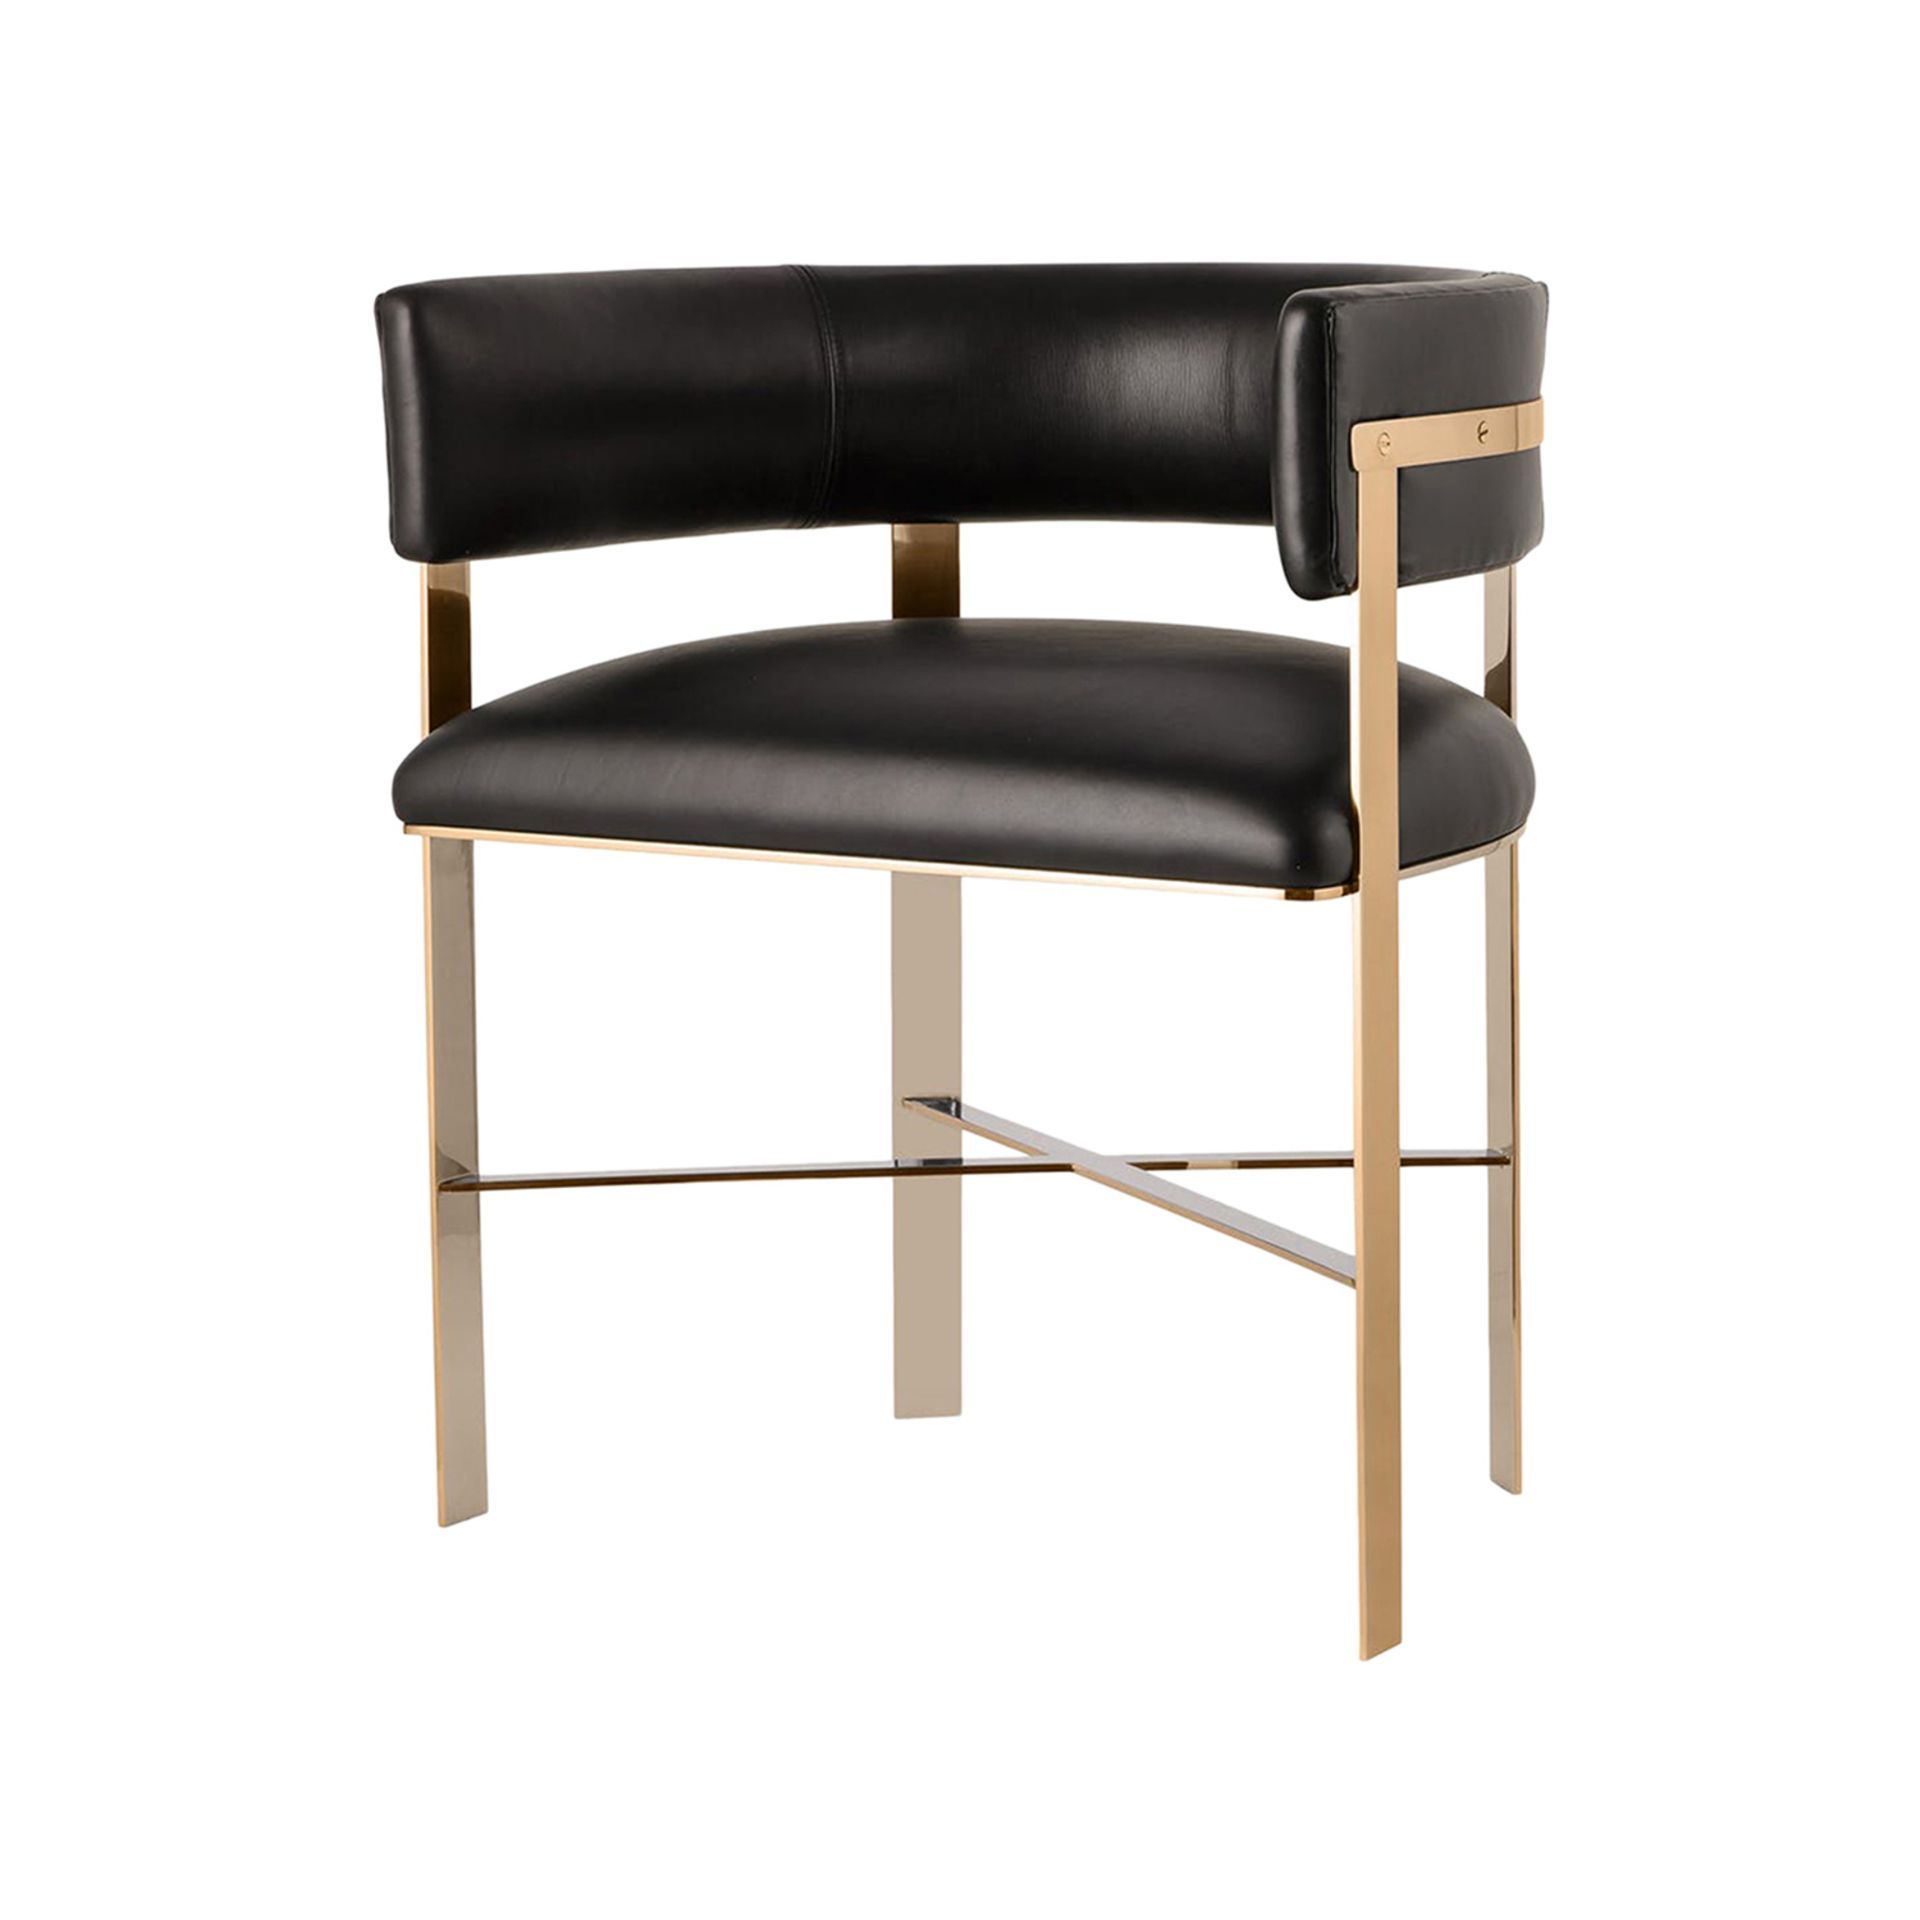 Art Dining Chair - Mirrored Brass / Black Onyx Leather The Art Dining Chair Incorporates Aspects - Bild 2 aus 2